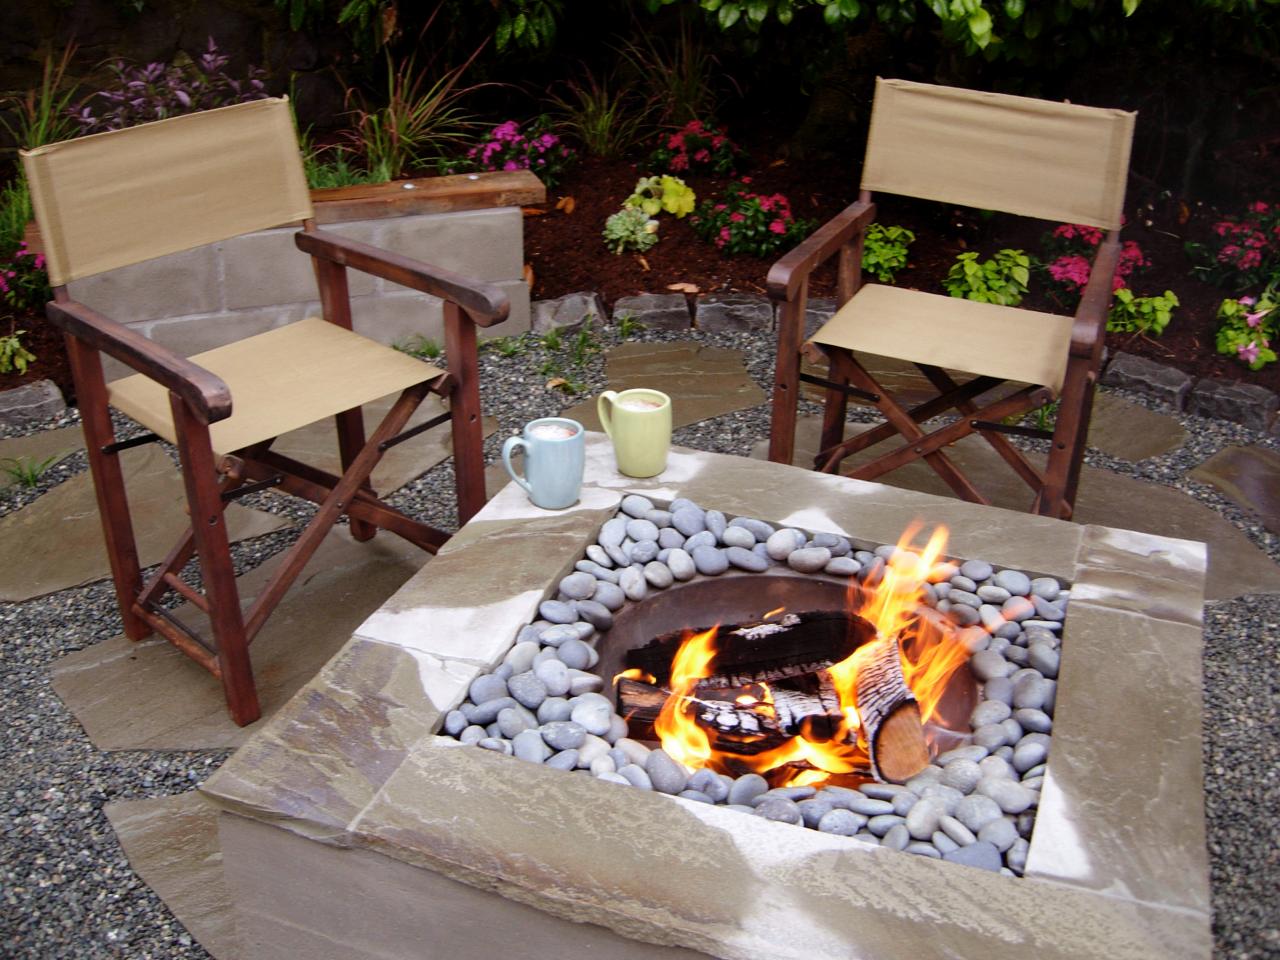 How To Make A Concrete Fire Feature, Concrete Outdoor Fire Pit